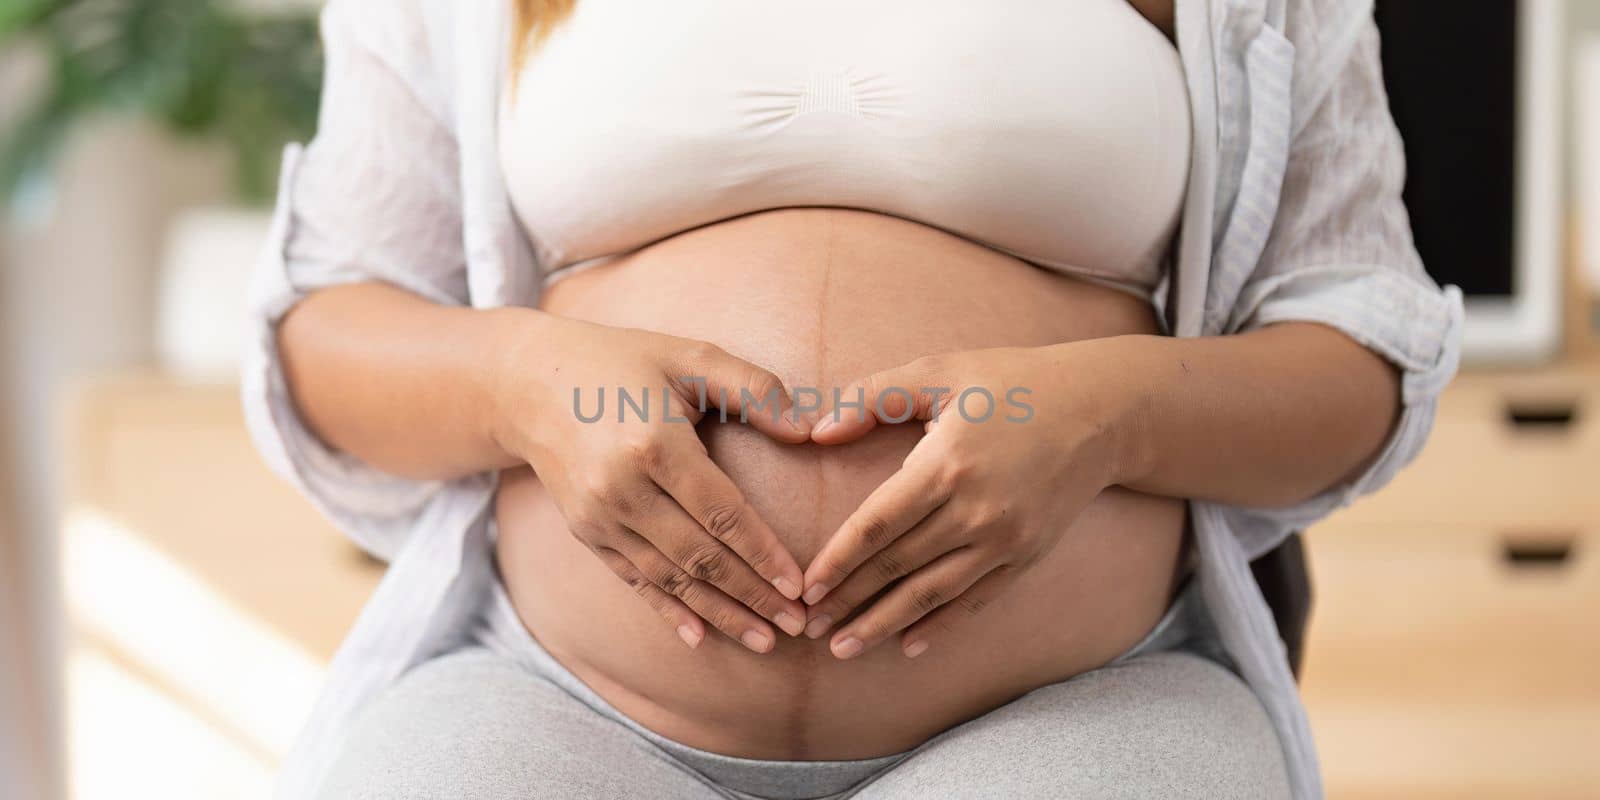 Pregnant woman holding hands on her belly making a heart symbol.